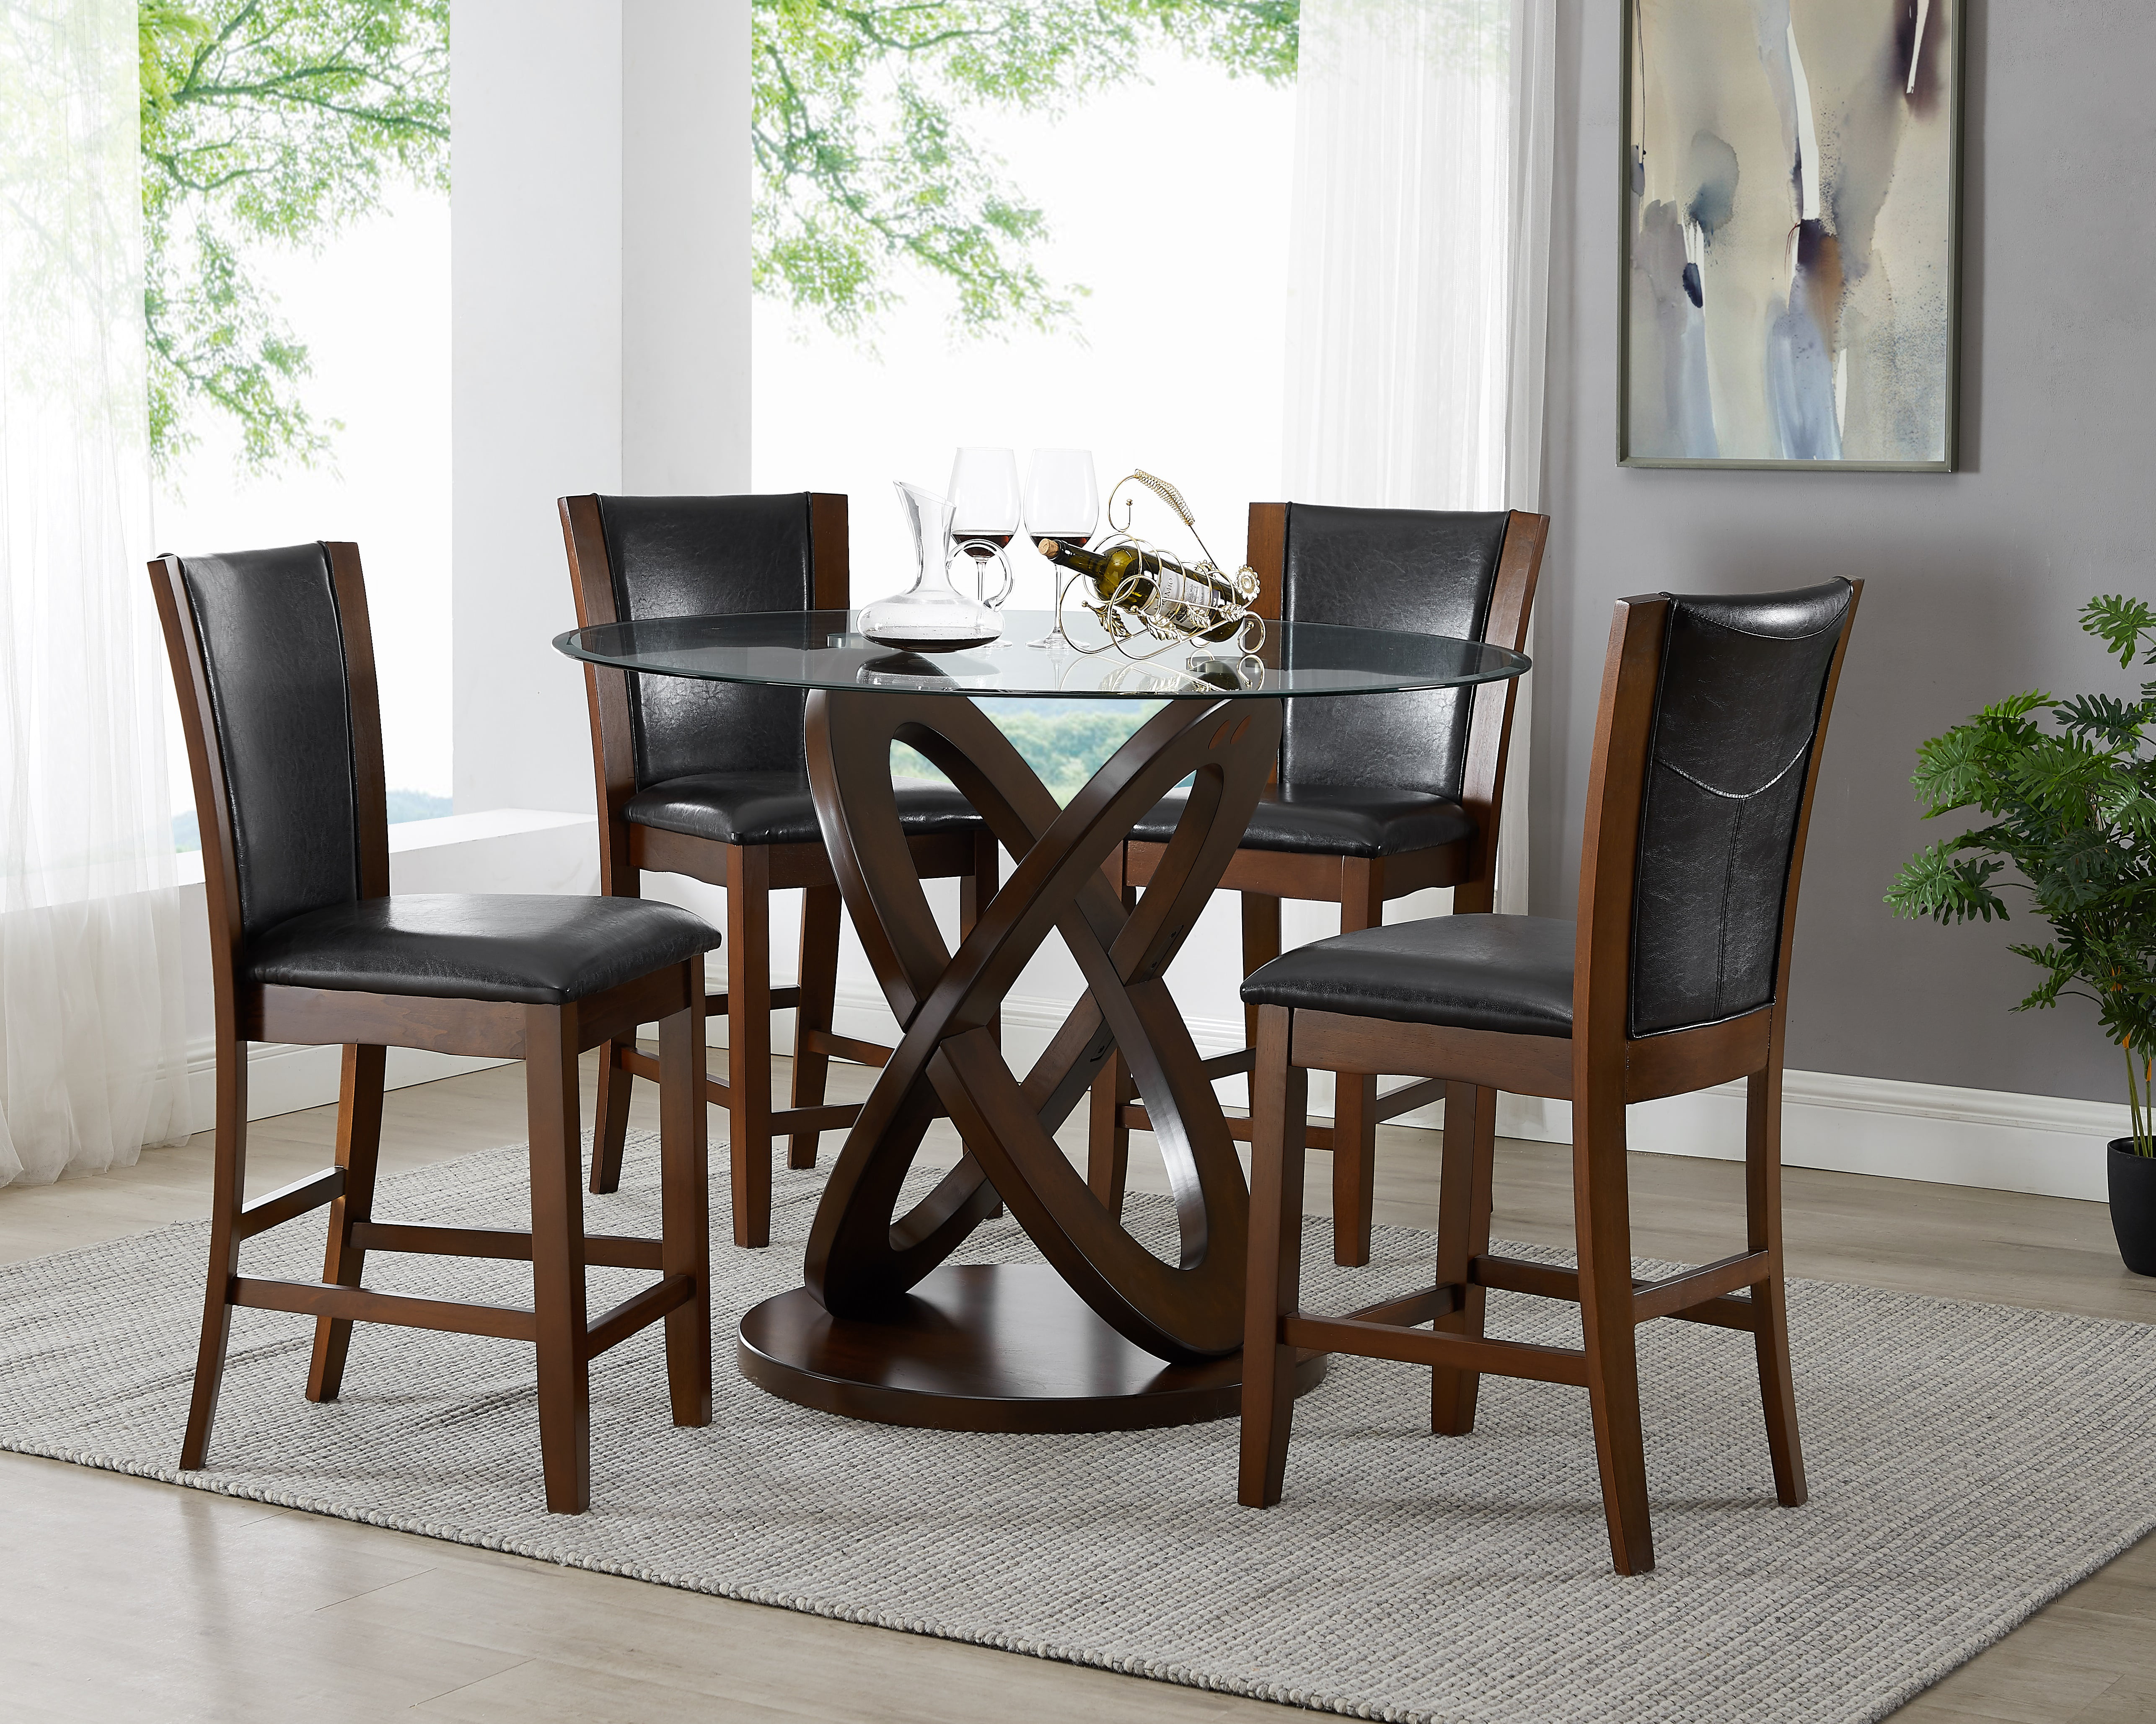 Roundhill Kecco 5 Piece Cicicol Counter Height Glass Top Dining Table ...